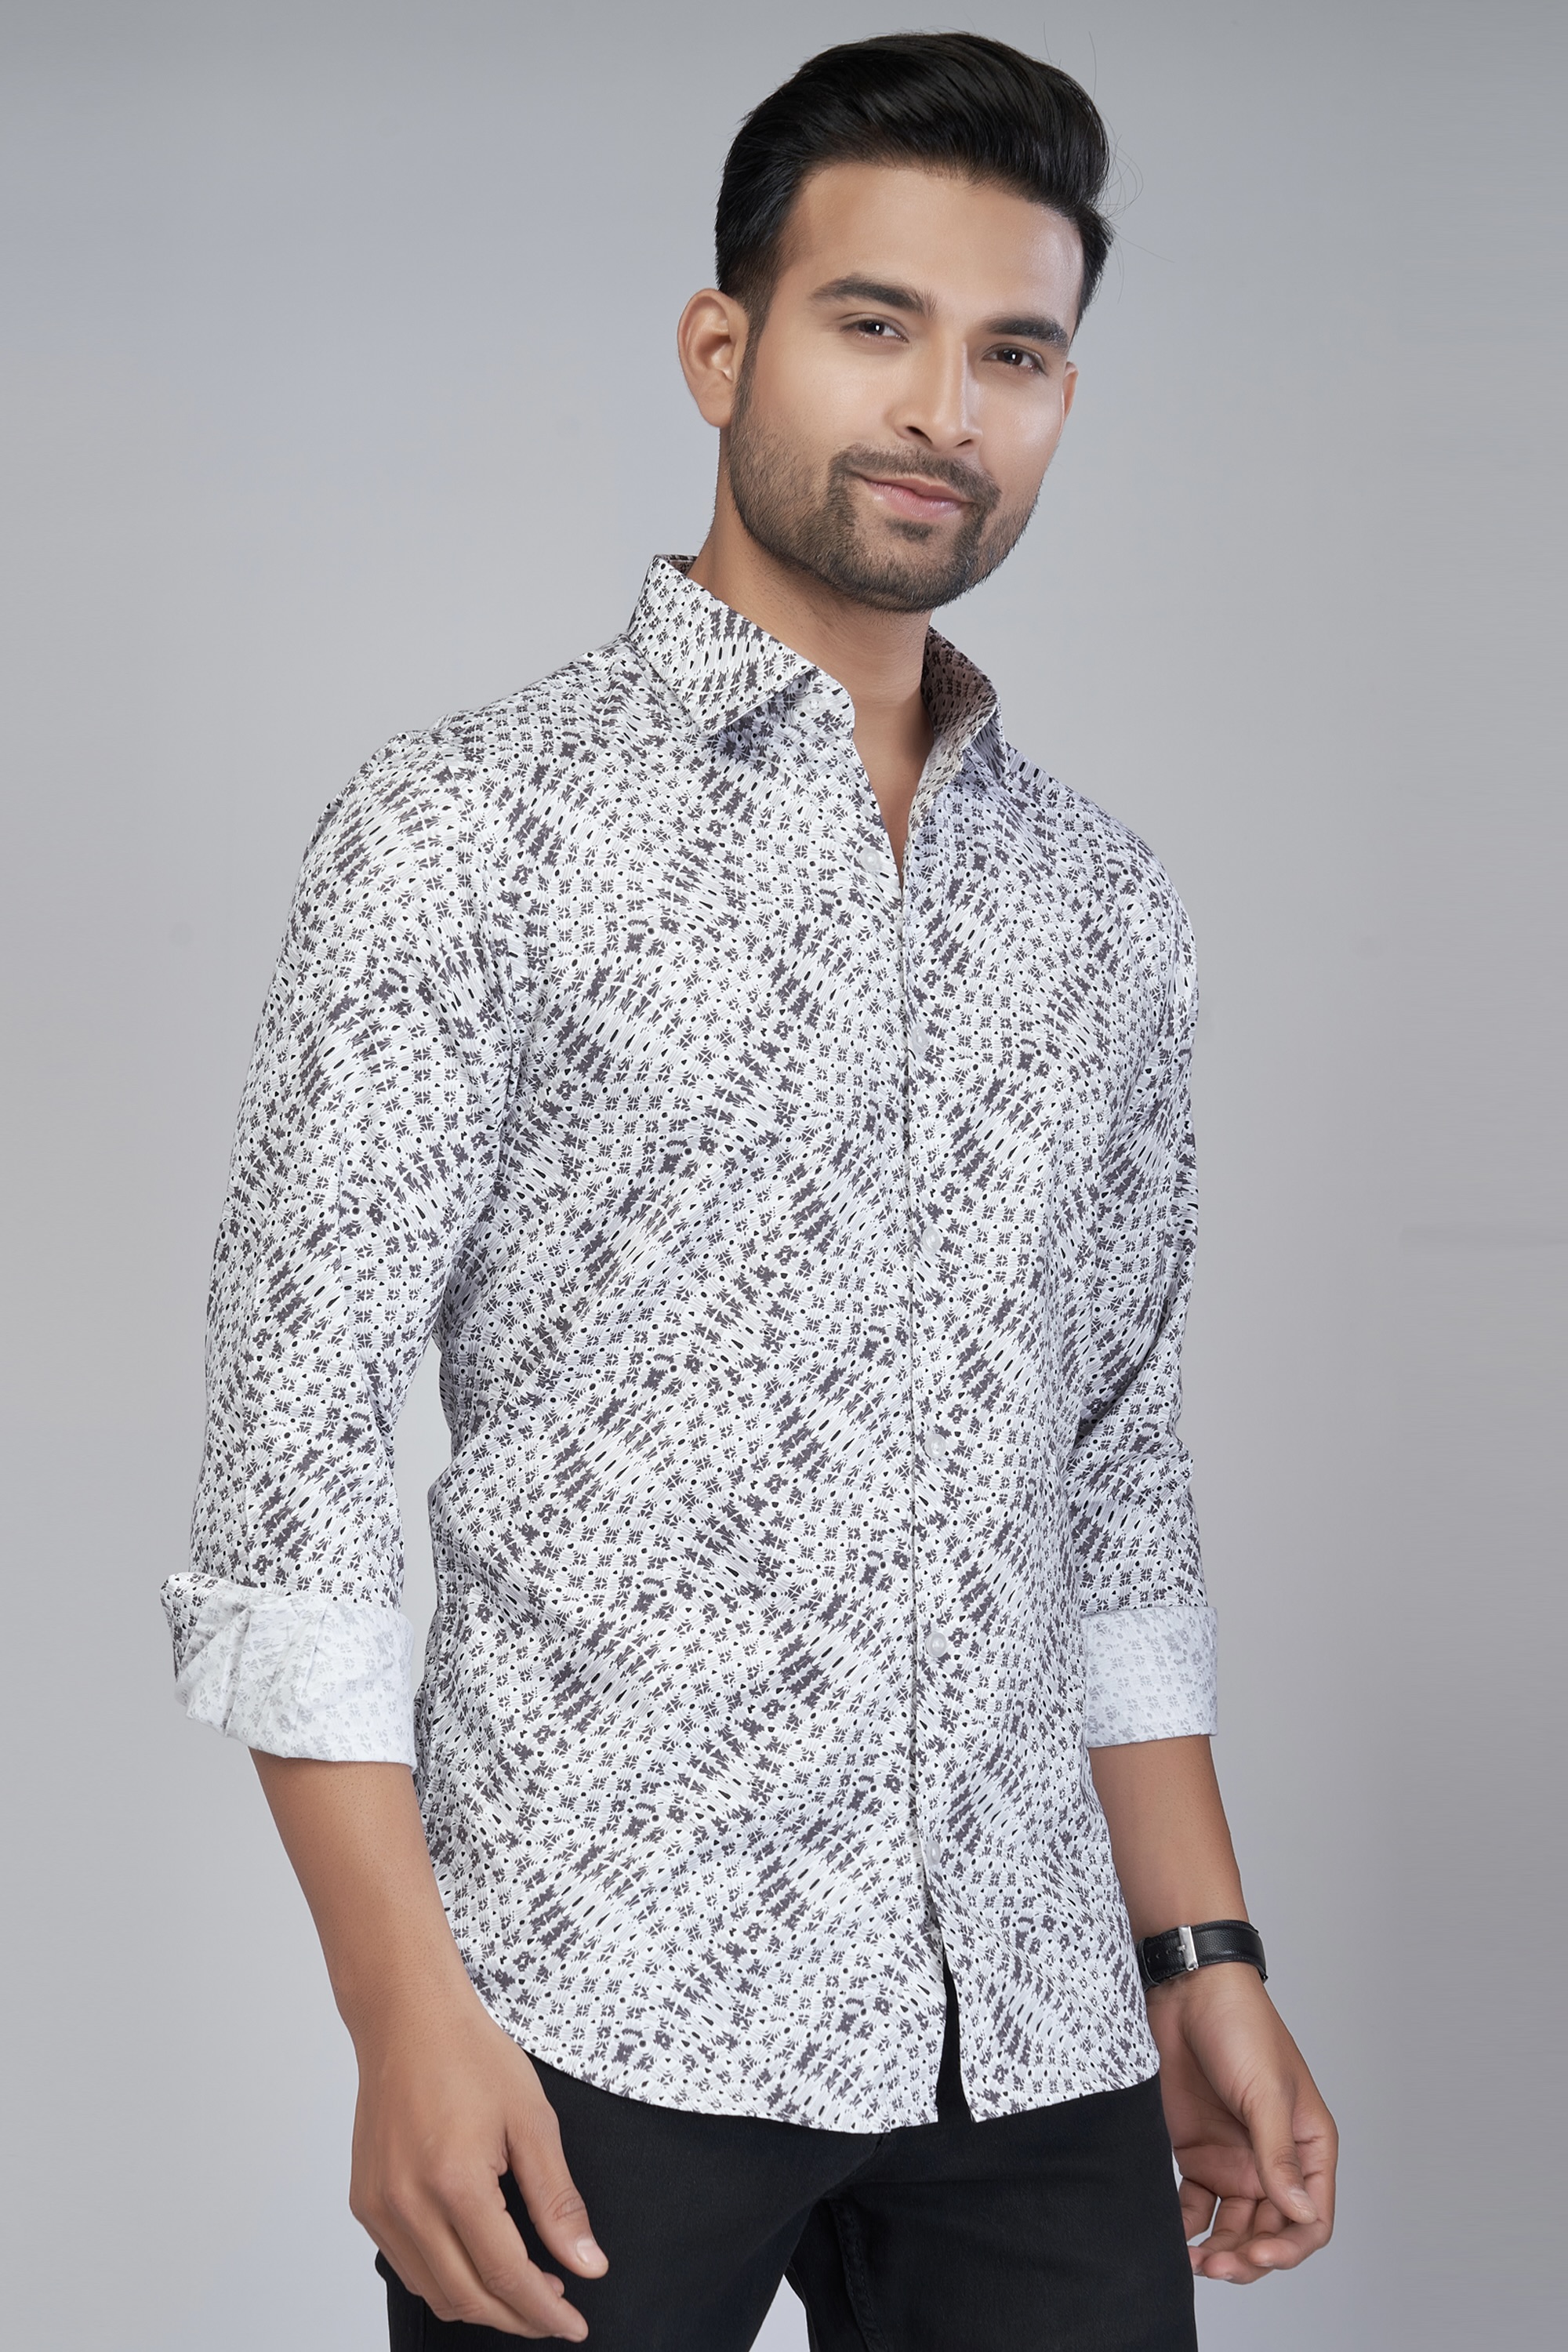 Black and White Printed Shirt for Men